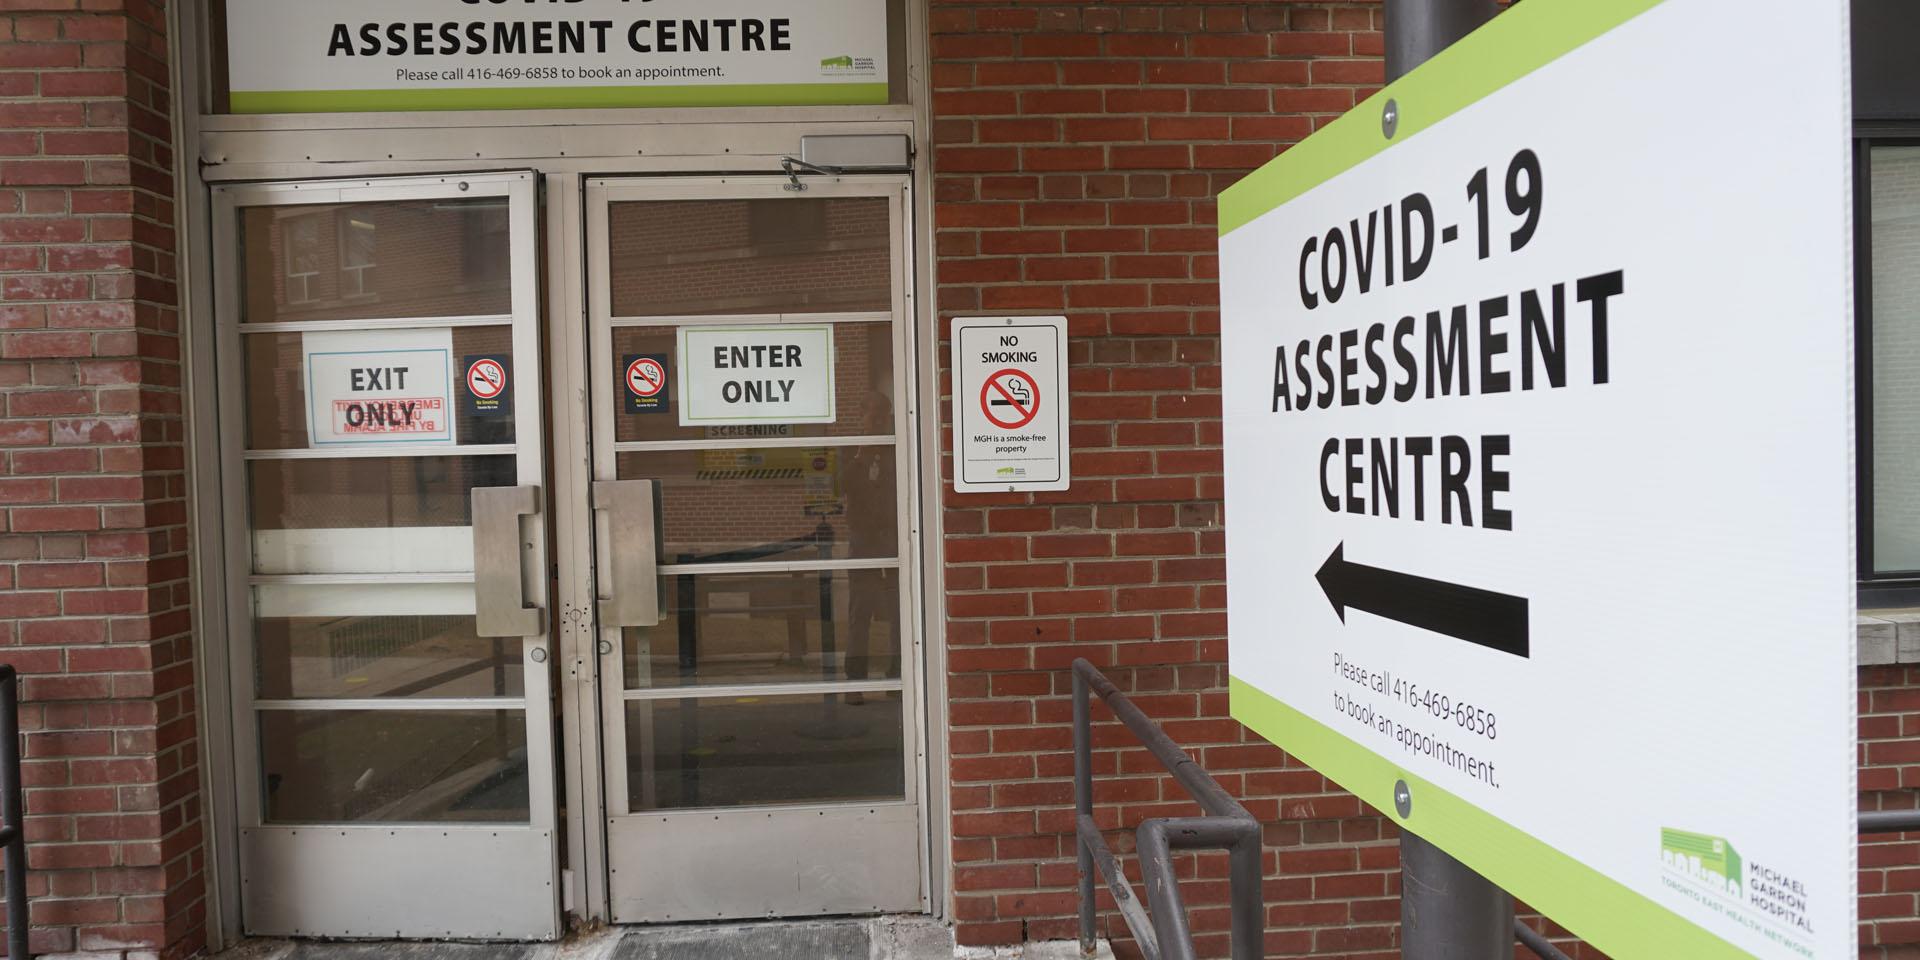 MGH's COVID-19 Assessment Centre